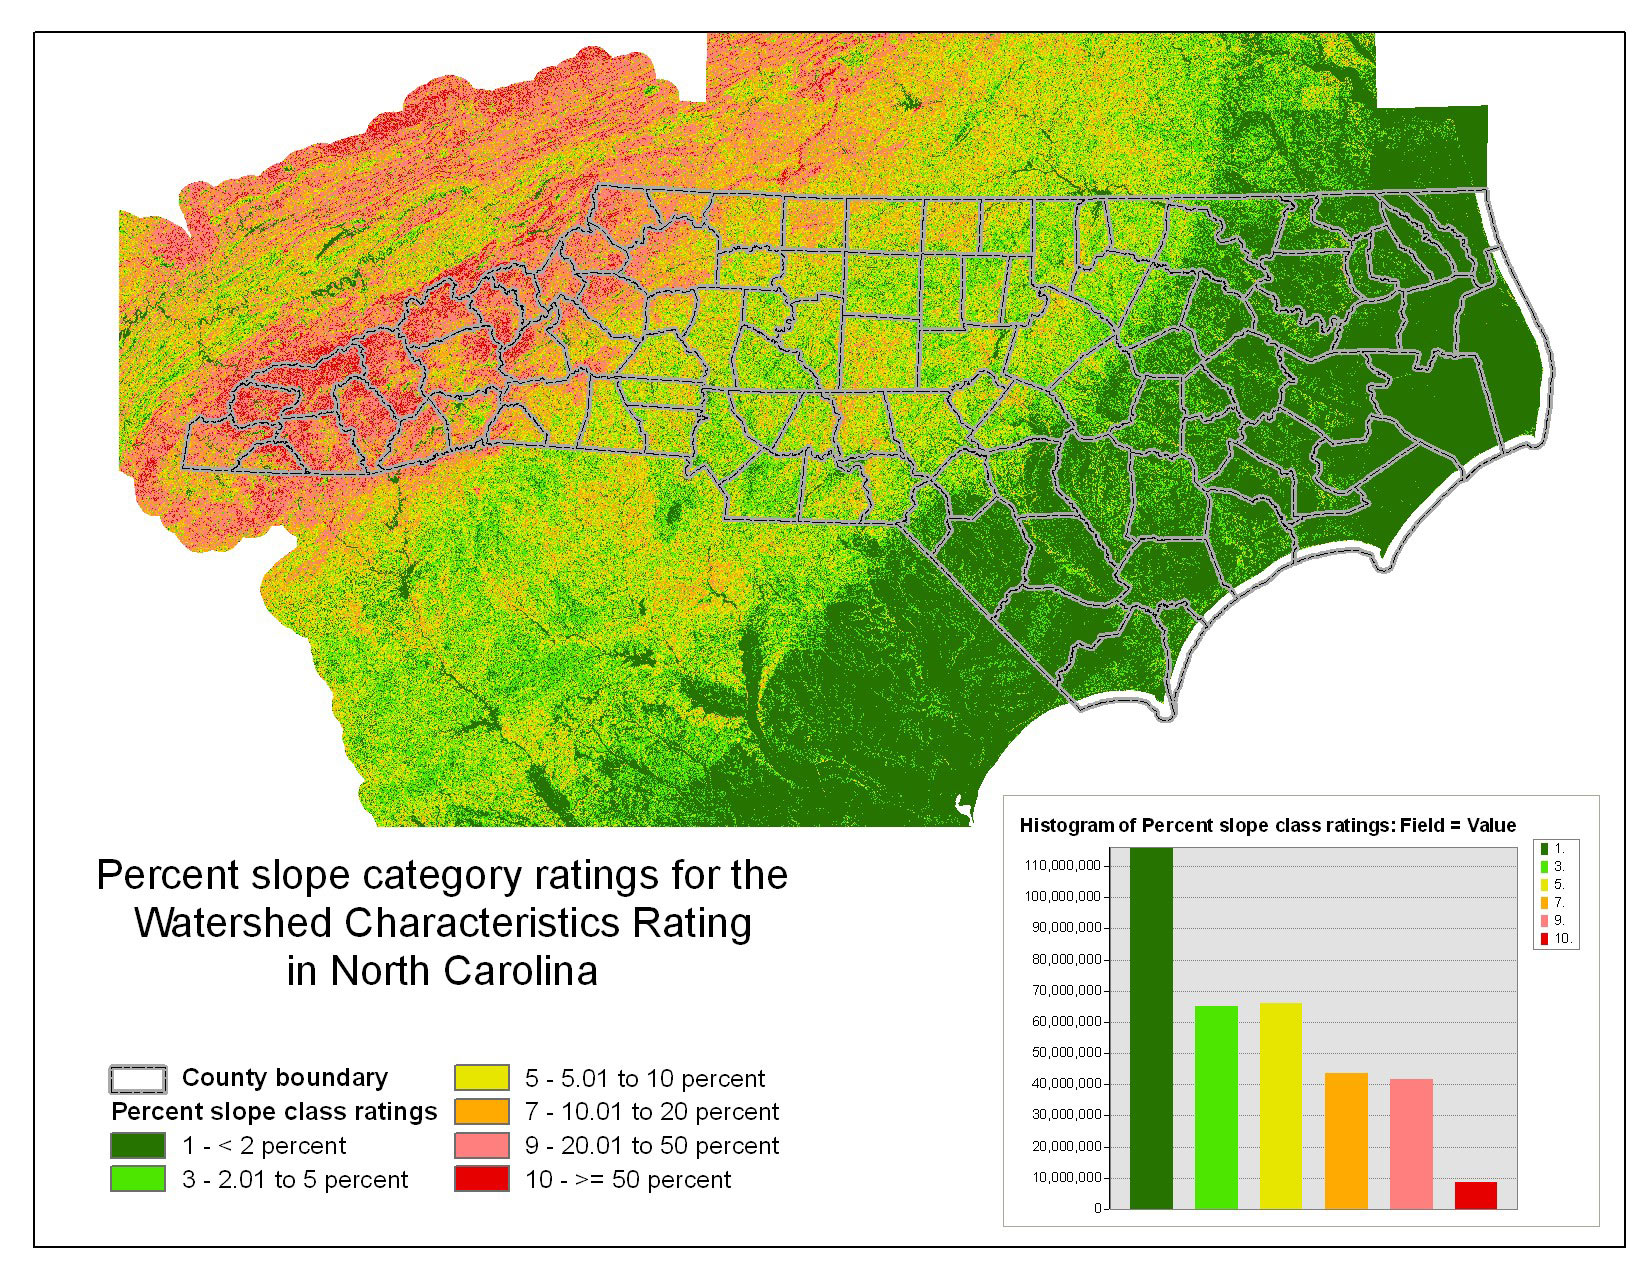 The land surface slope ratings for the watershed characteristics rating for North Carolina